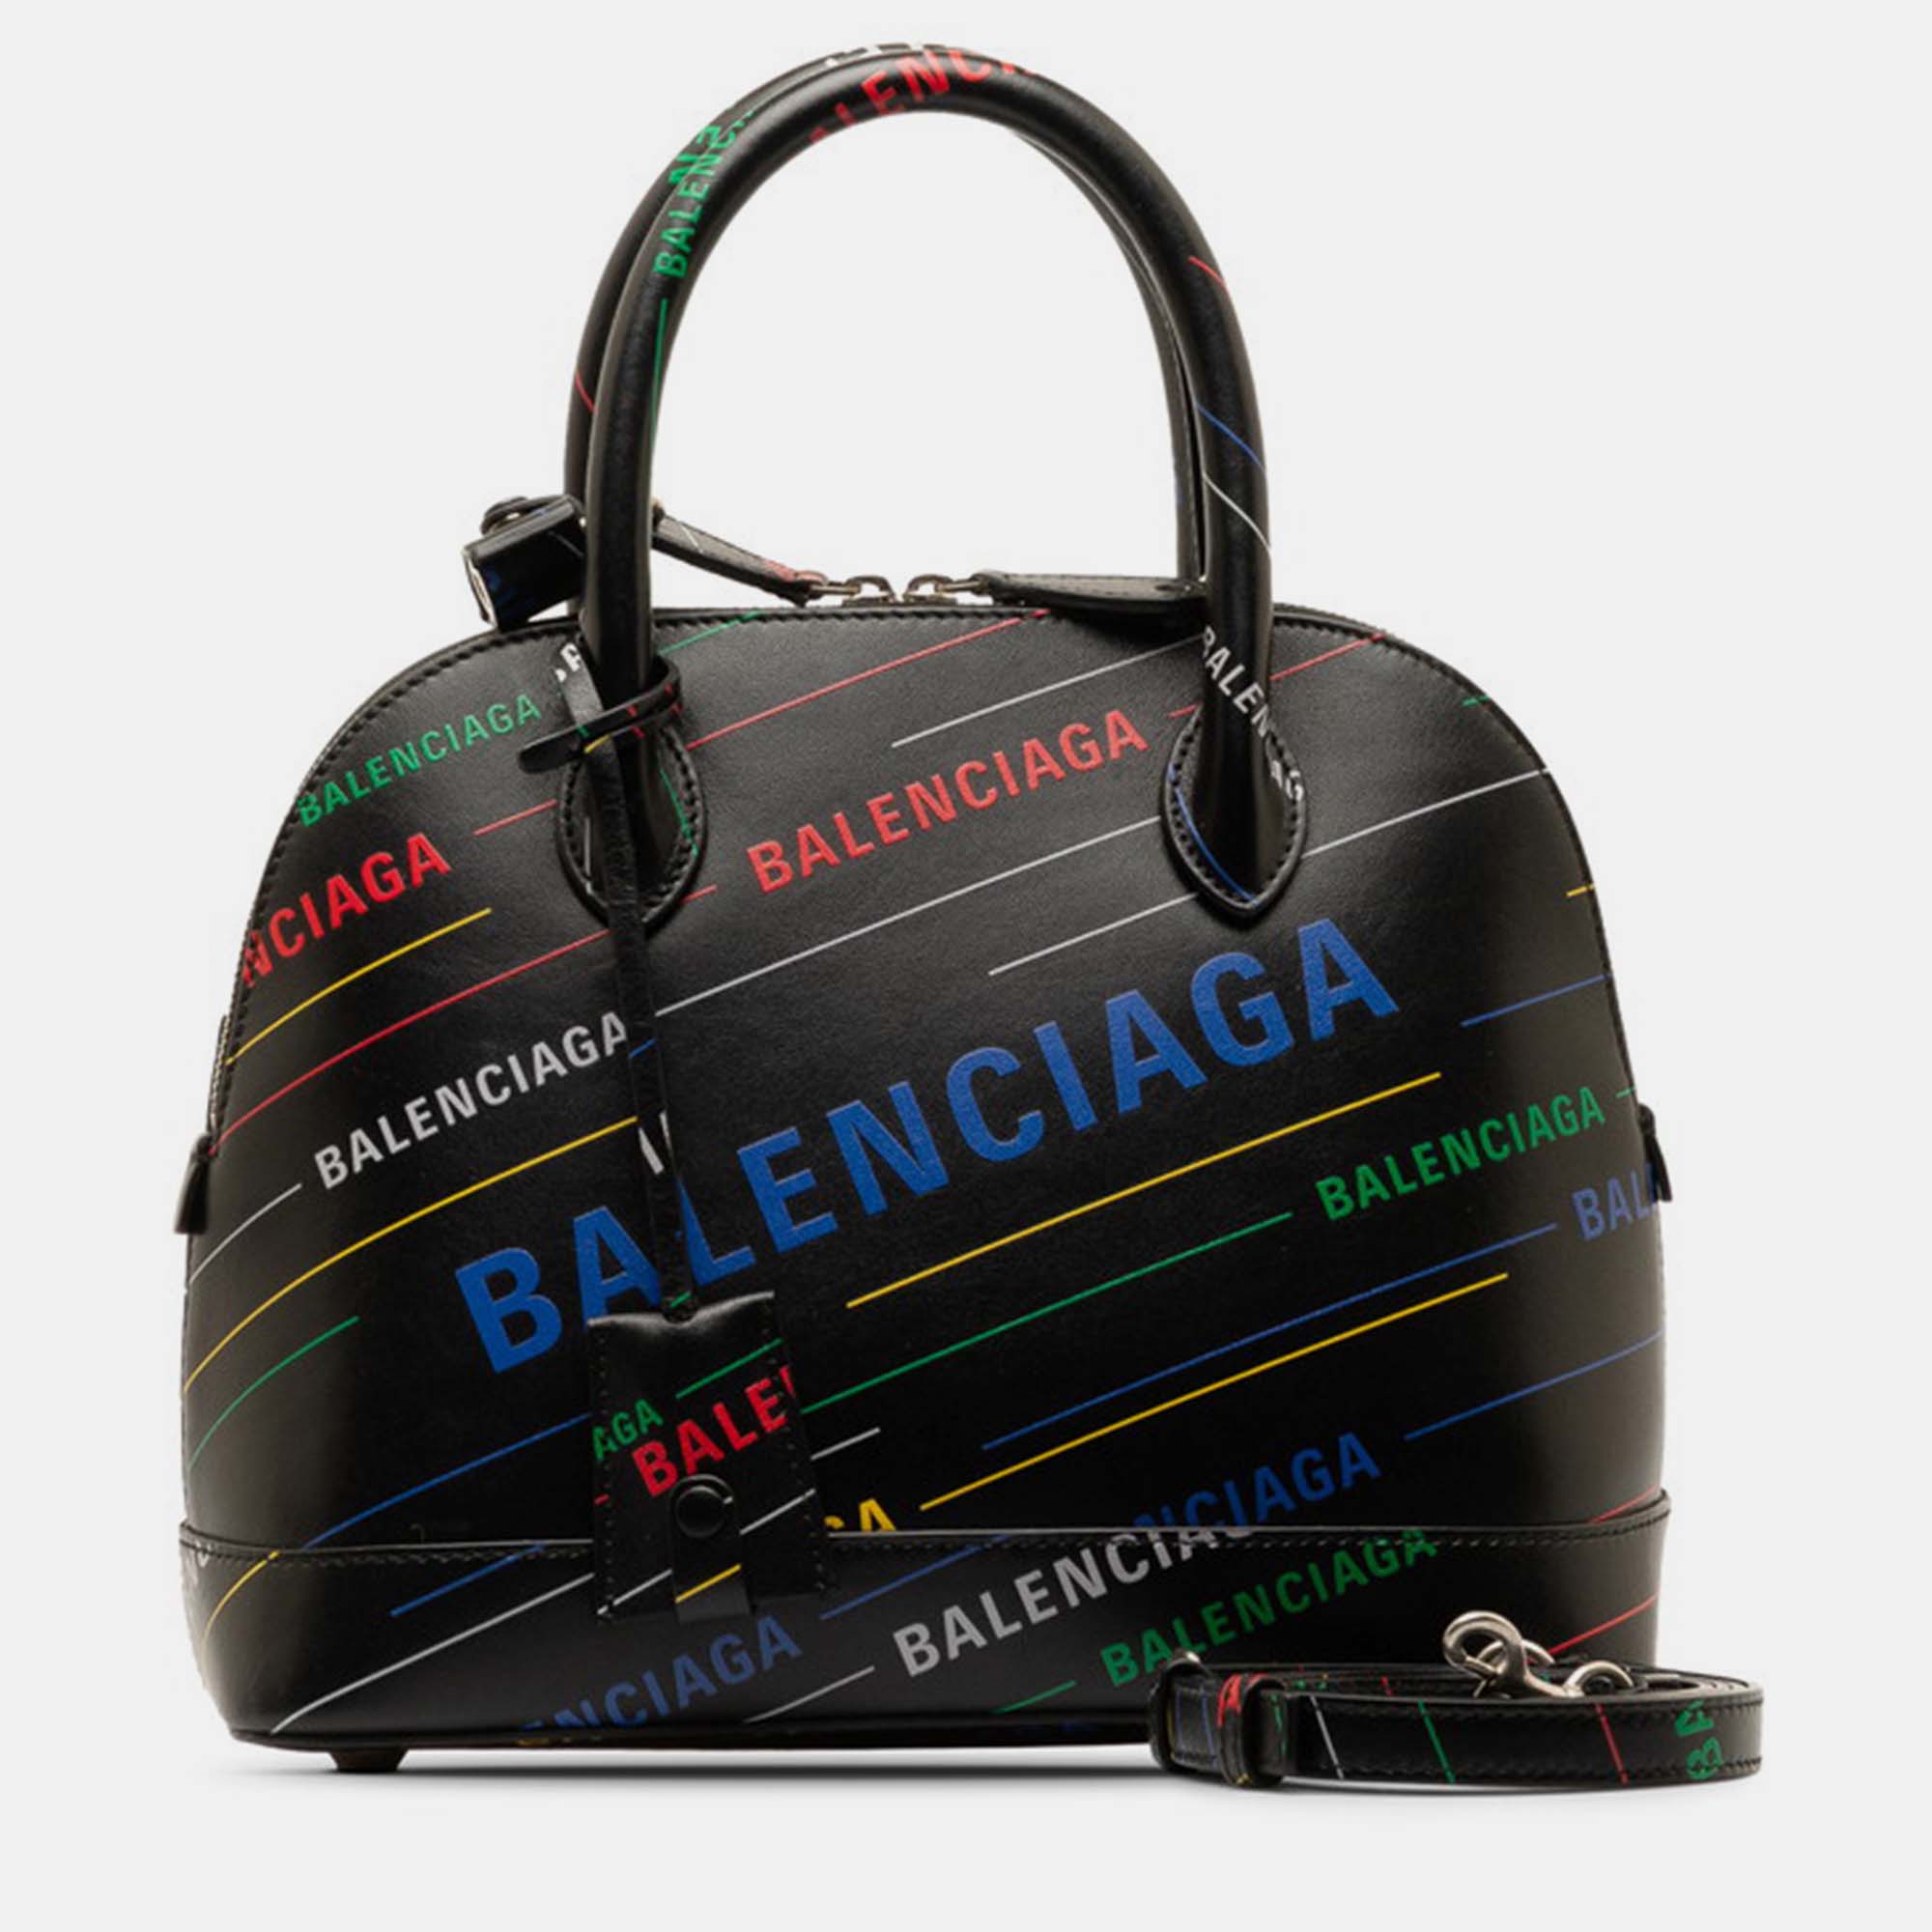 The classy silhouette and the use of durable materials for the exterior bring out the appeal of this Balenciaga satchel for women. It promises to be a durable style ally.